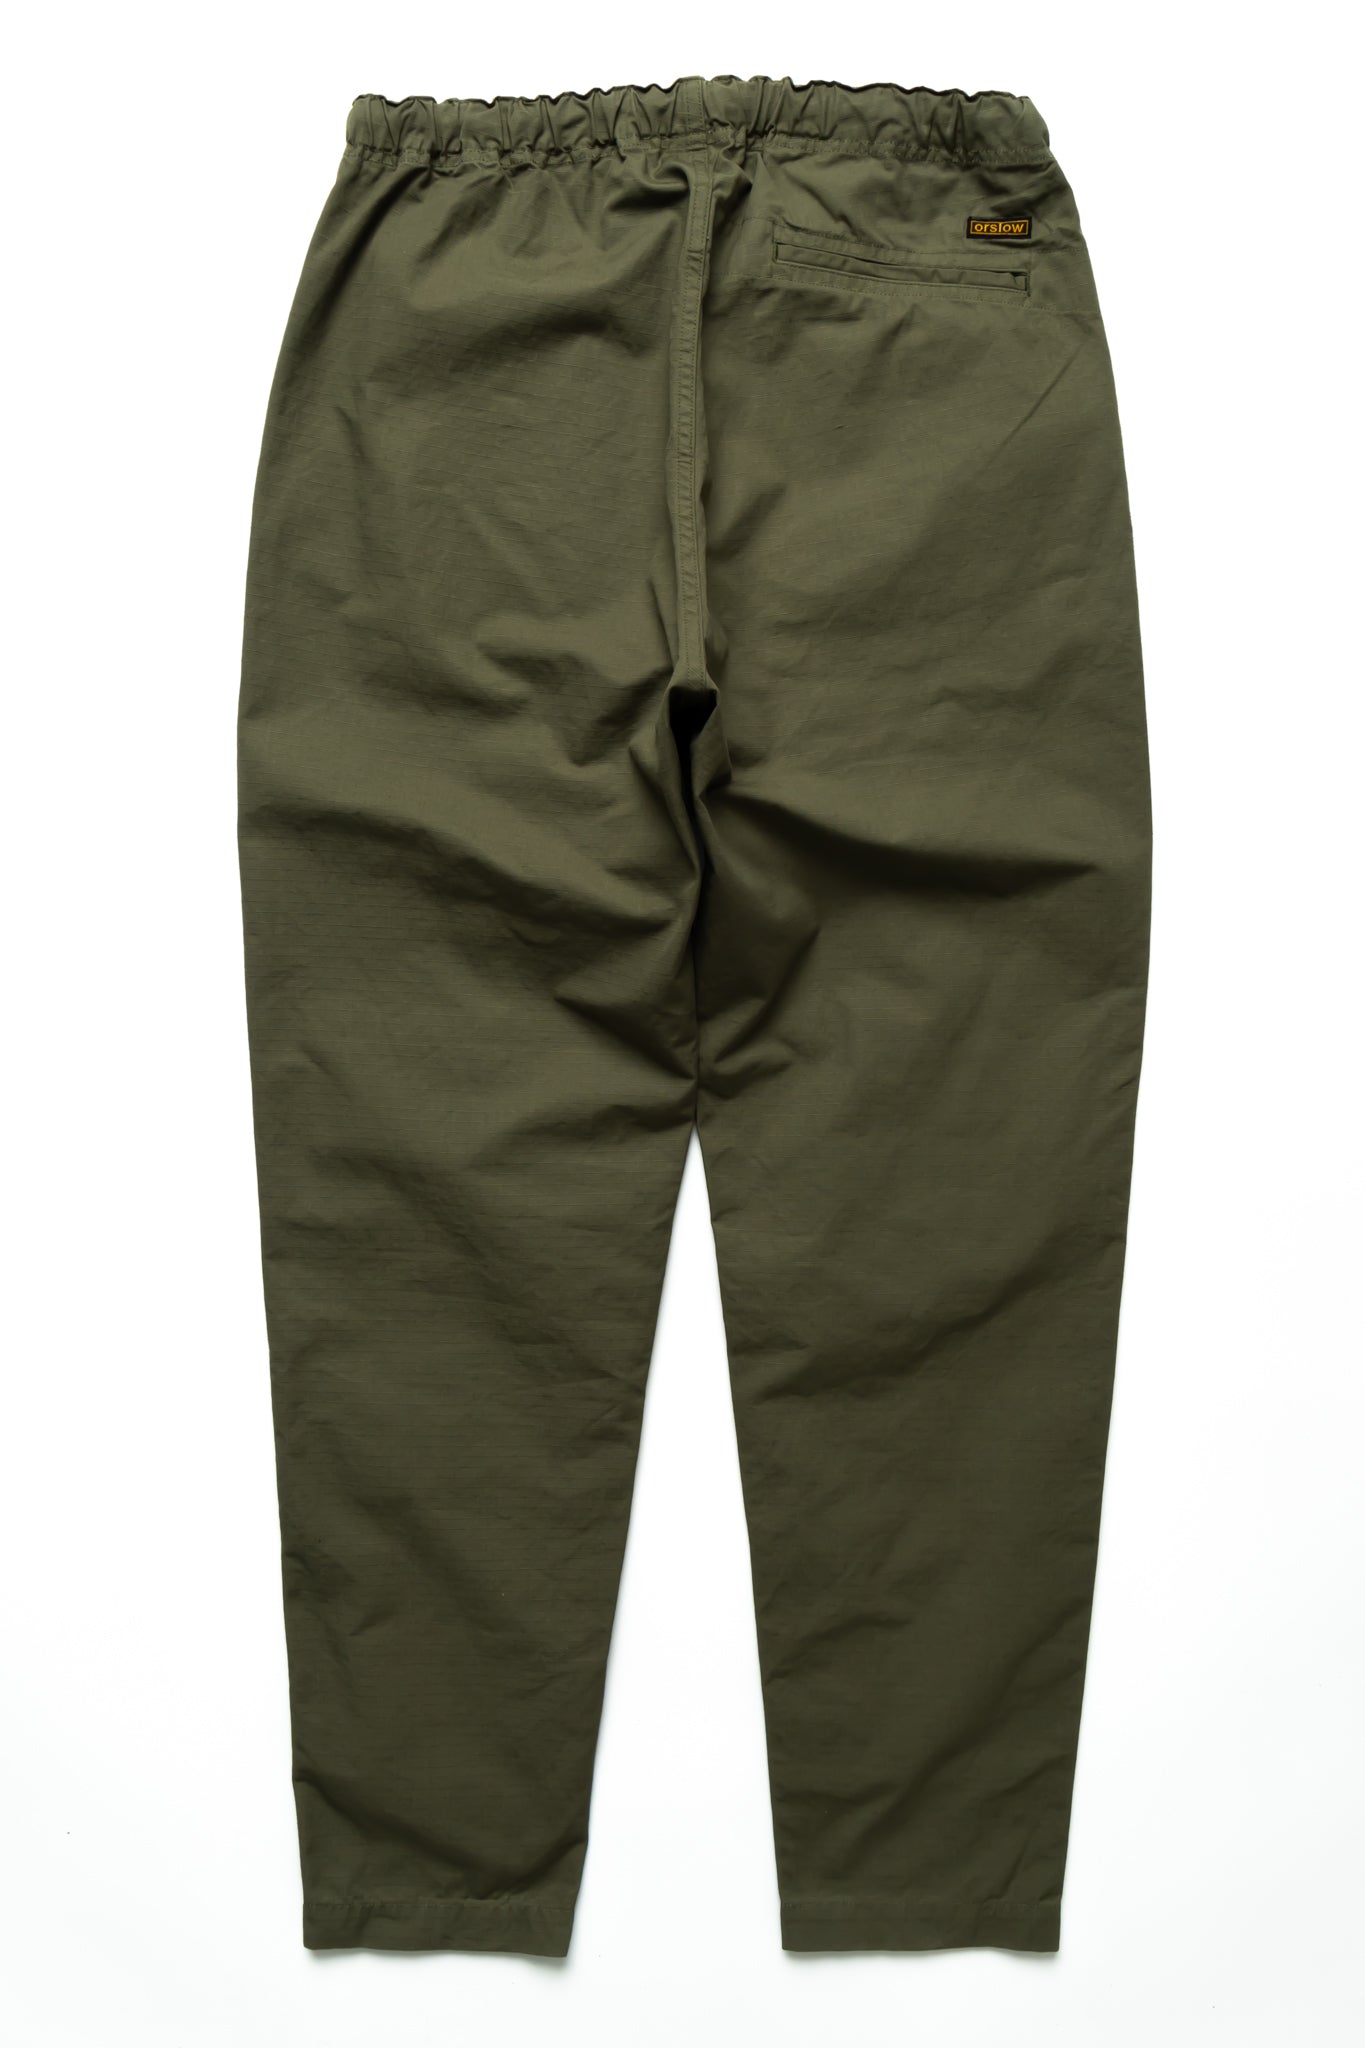 Easy to wear Orslow trousers with an elastic waist and cord drawstring made in Japanese 100% cotton ripstop fabric. Straight leg with a slight taper that features two front pockets and one back. Color: Army Green. Fabric: 100% Cotton. Unisex. Made in Japan.